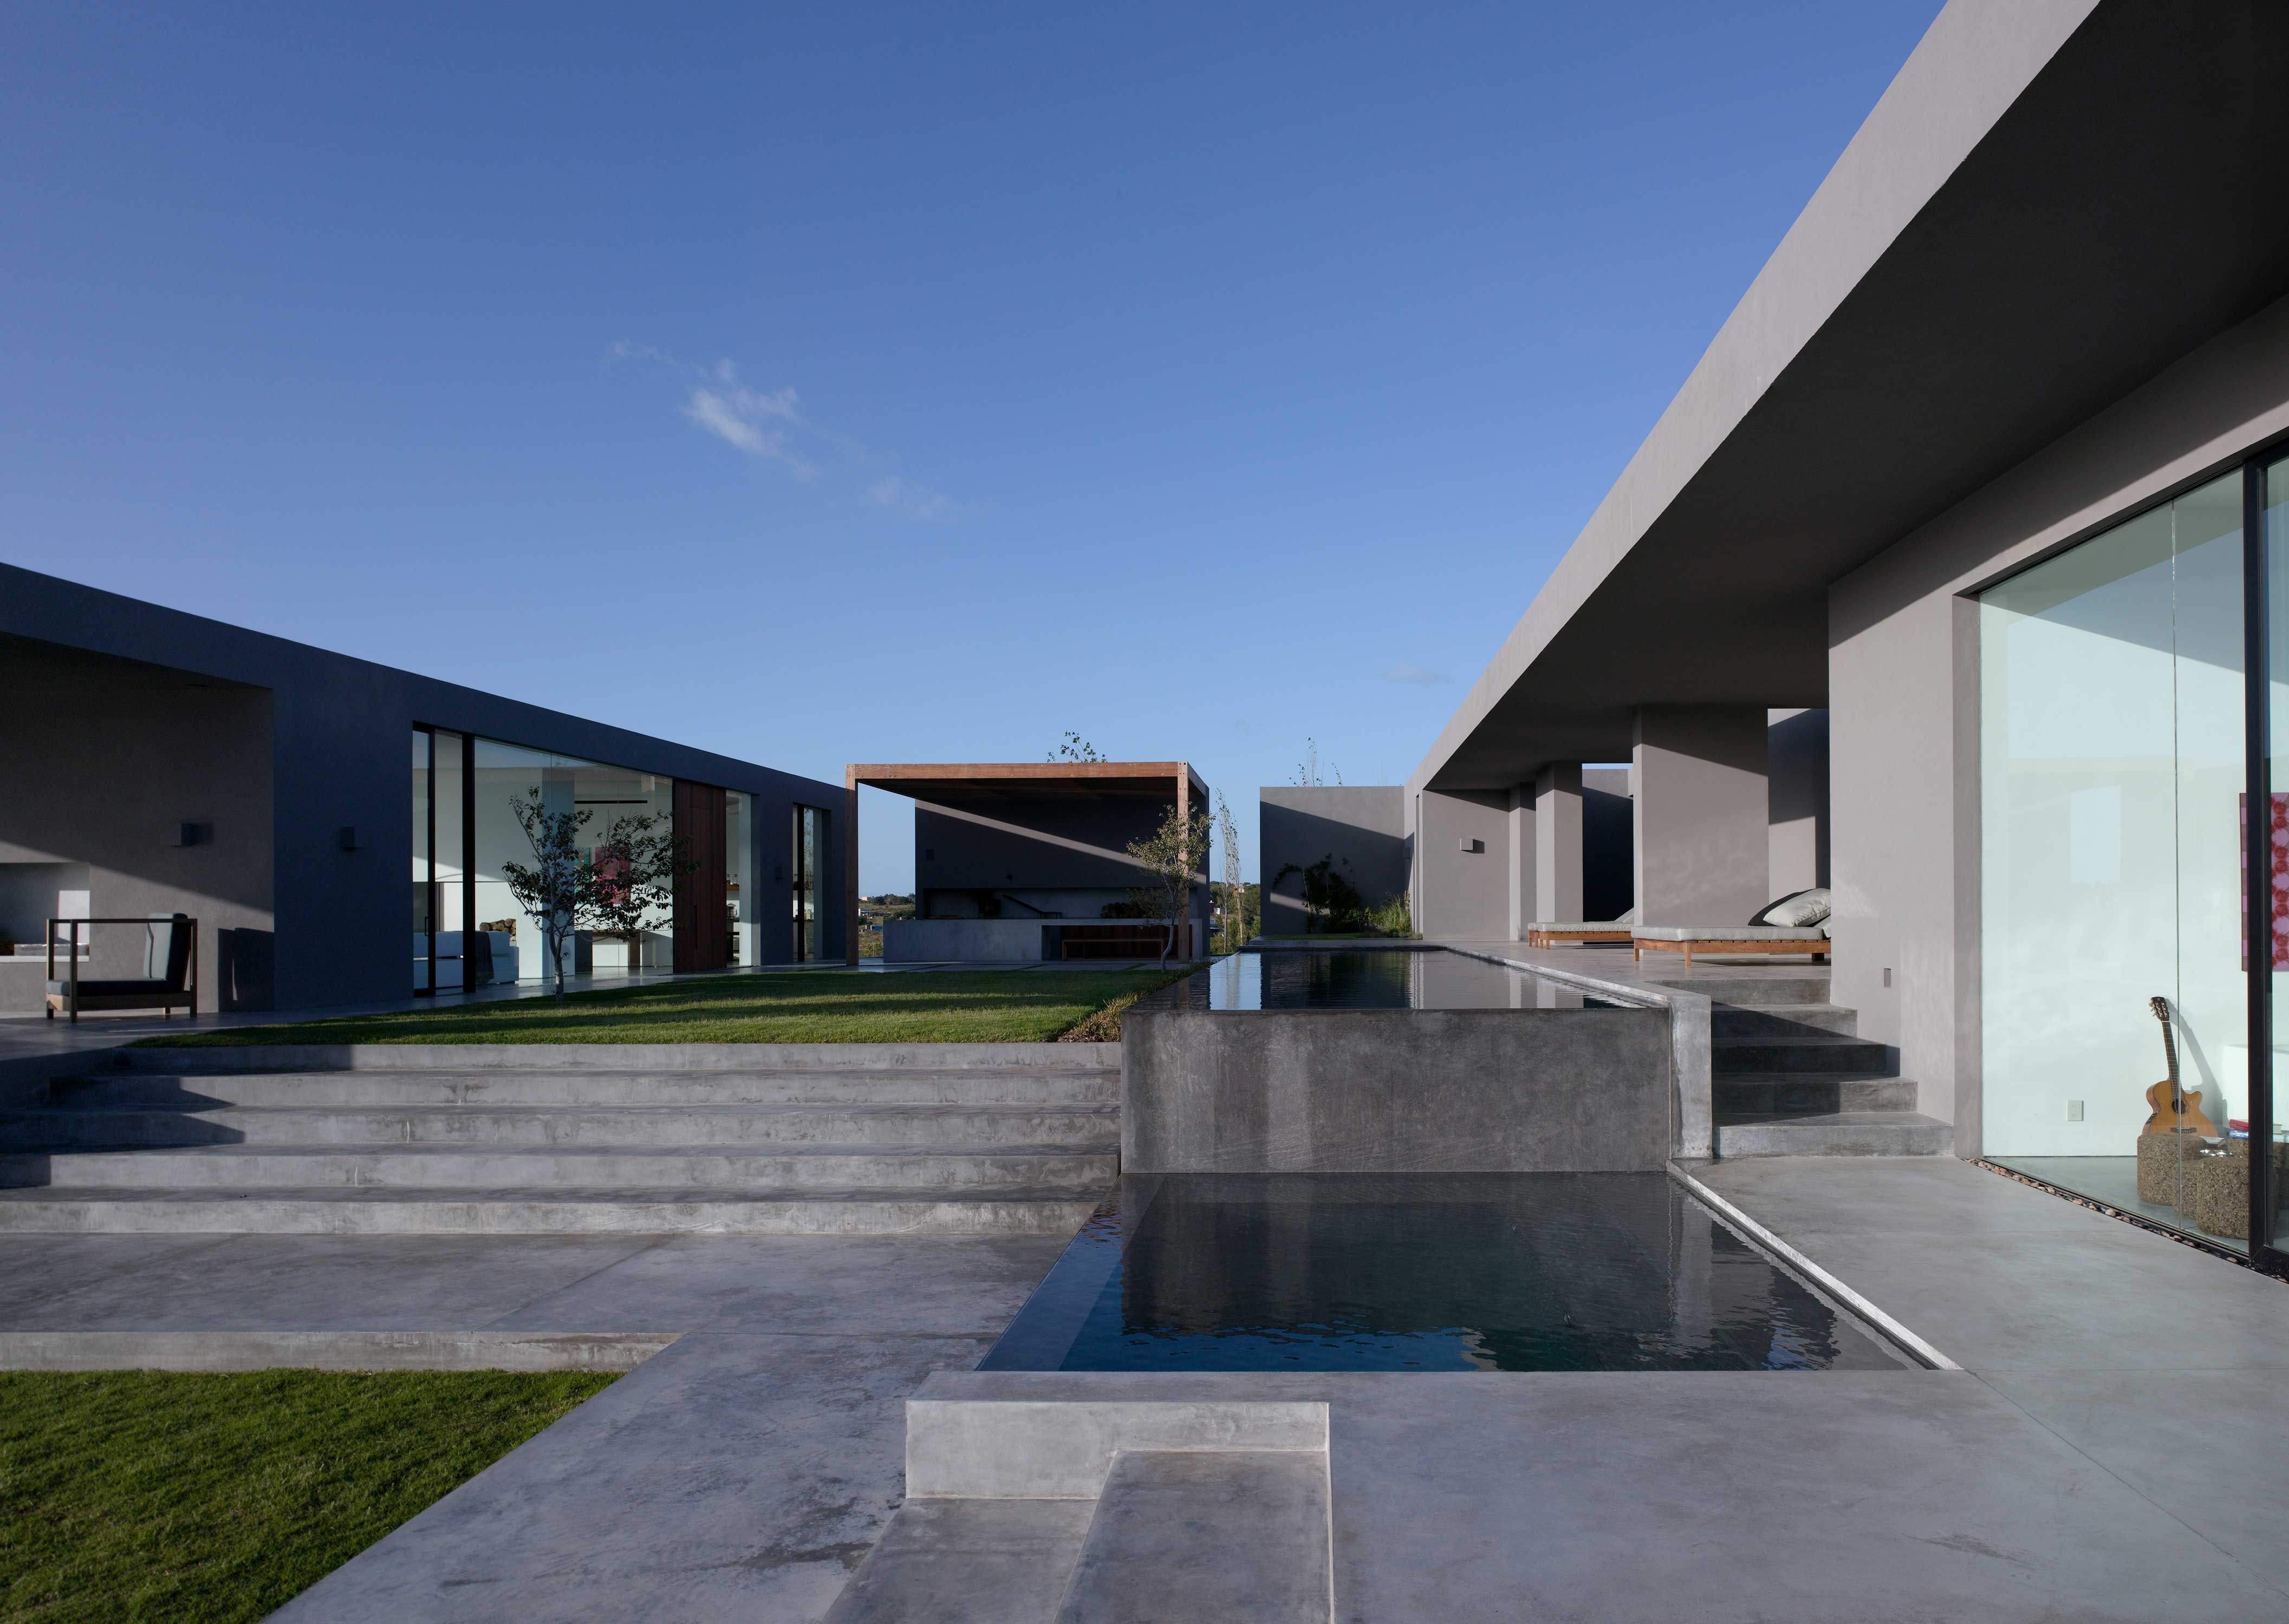 This eight-acre estate in the private community of Villalagos on Uruguay’s Gold Coast was designed for the contemporary ranch lifestyle.